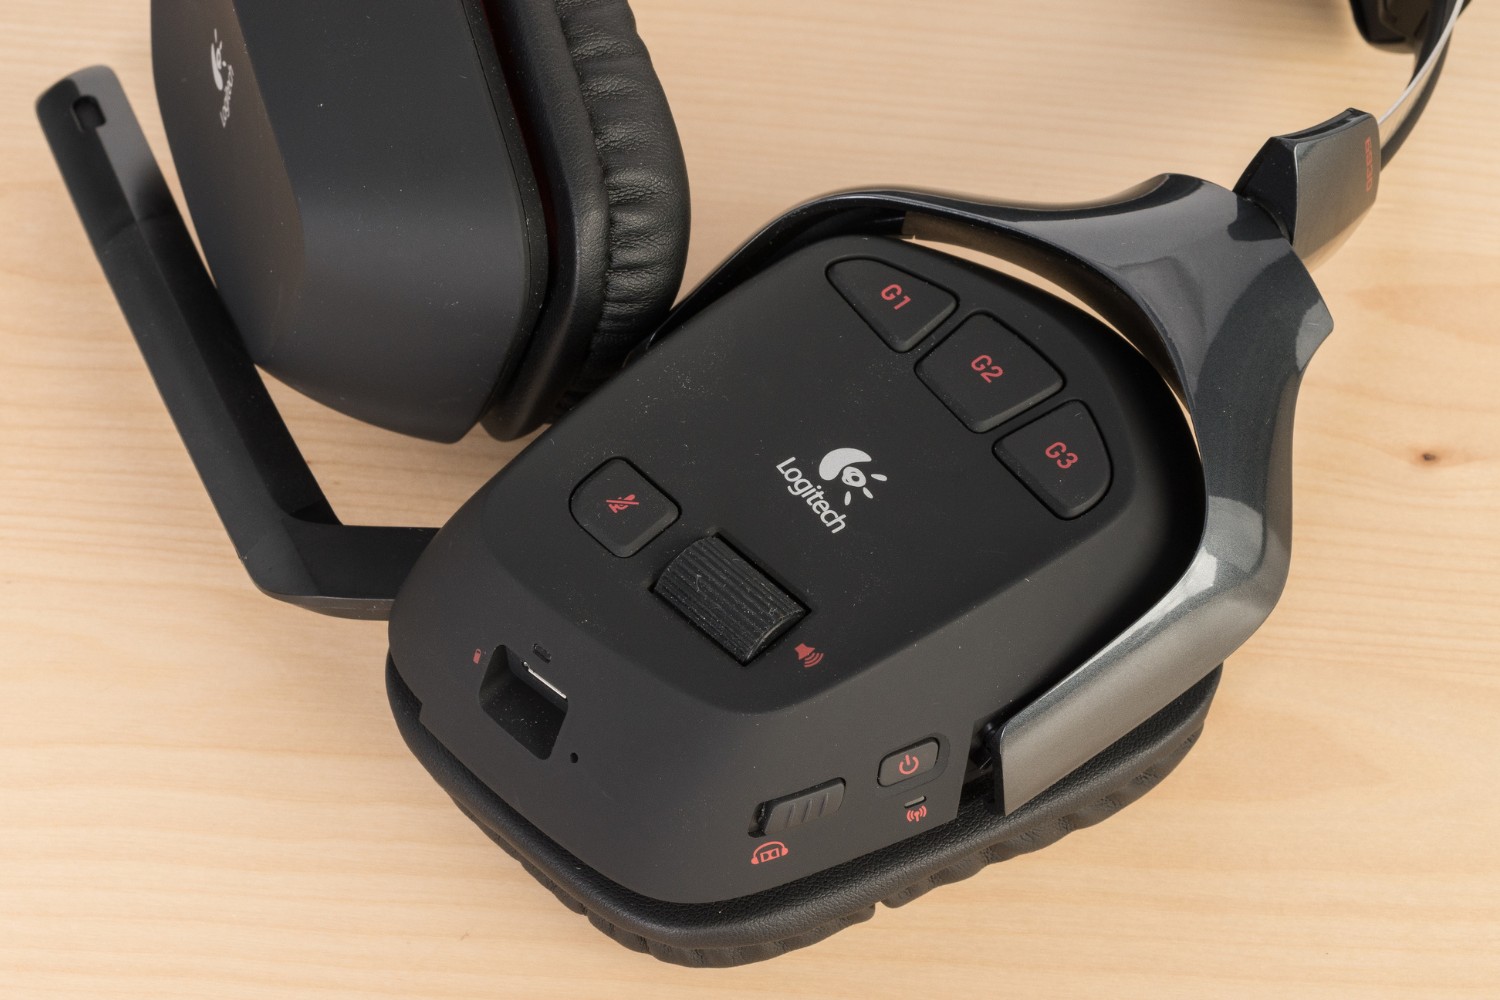 How To Change The Battery In The Logitech G930 Wireless Gaming Headset (981-000257)